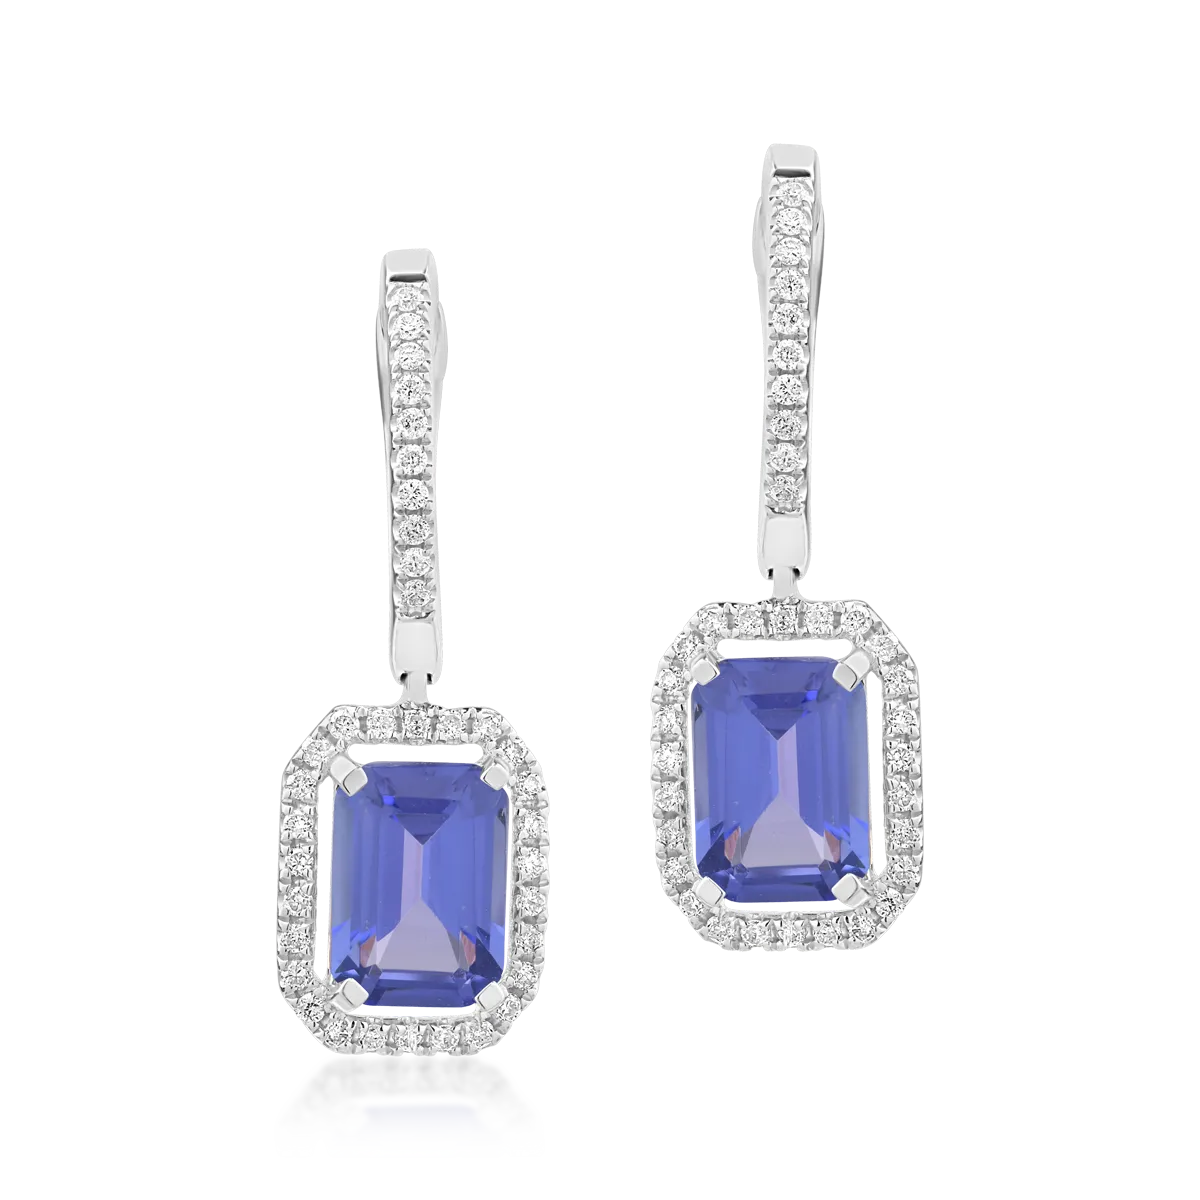 18K white gold earrings with 2.23ct tanzanite and 0.23ct diamonds